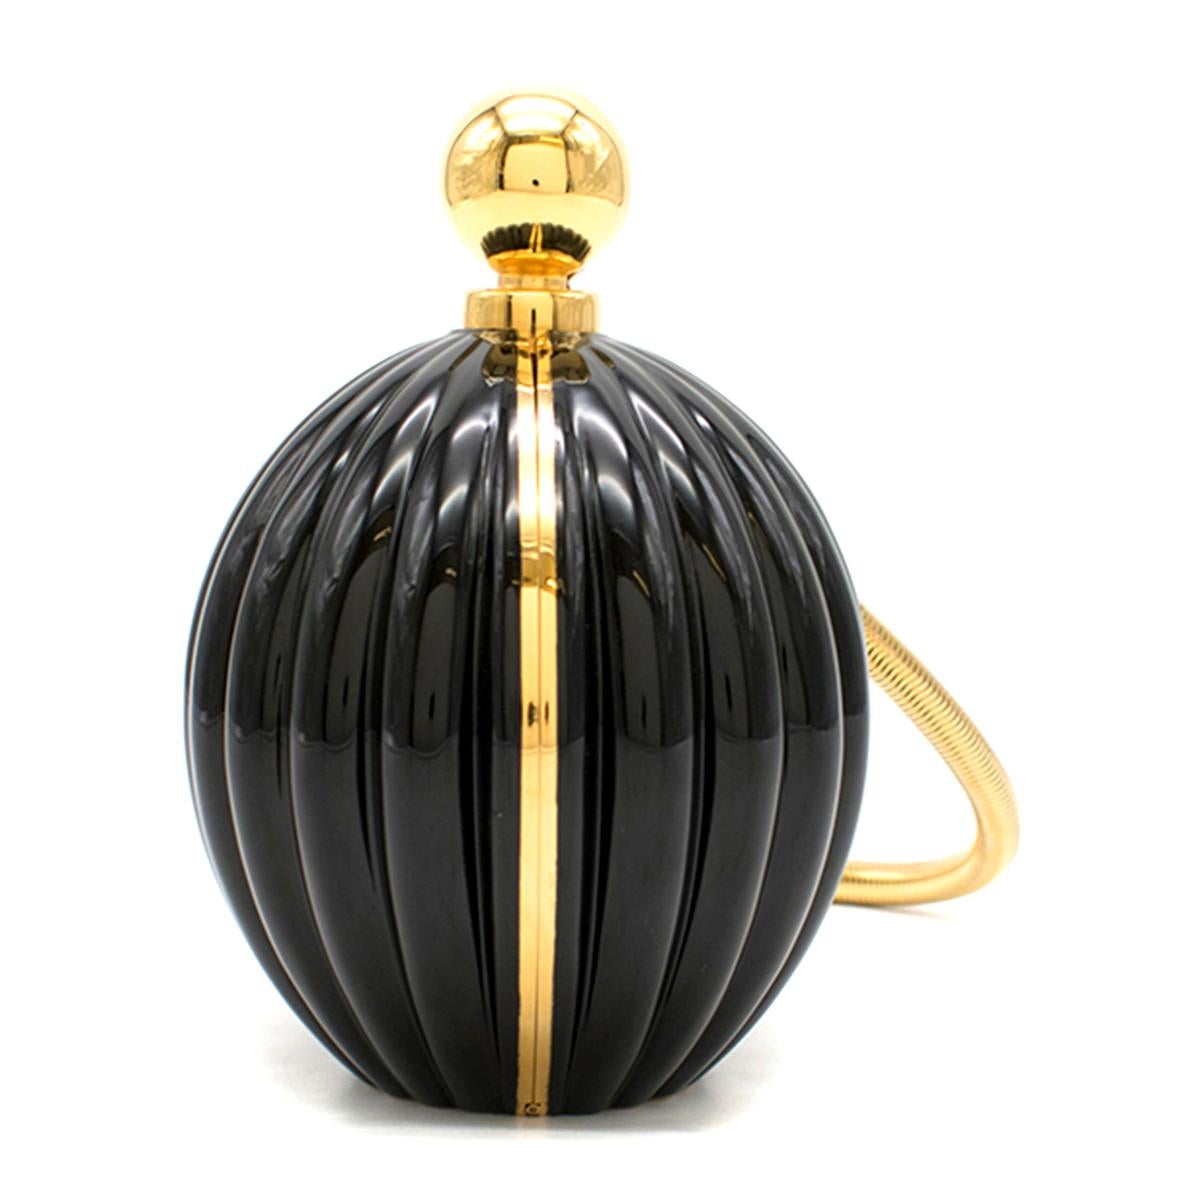 Lanvin Black Black 'Arpege Minaudiere' Ball Clutch

- Black Ball Clutch 
- Enamel round body, shaped like perfume 
- Gilt clasp with gold toned ball with logo embossed 
- Detachable wrist serpentine strap
- Hinged base
- Goat leather lining 

This